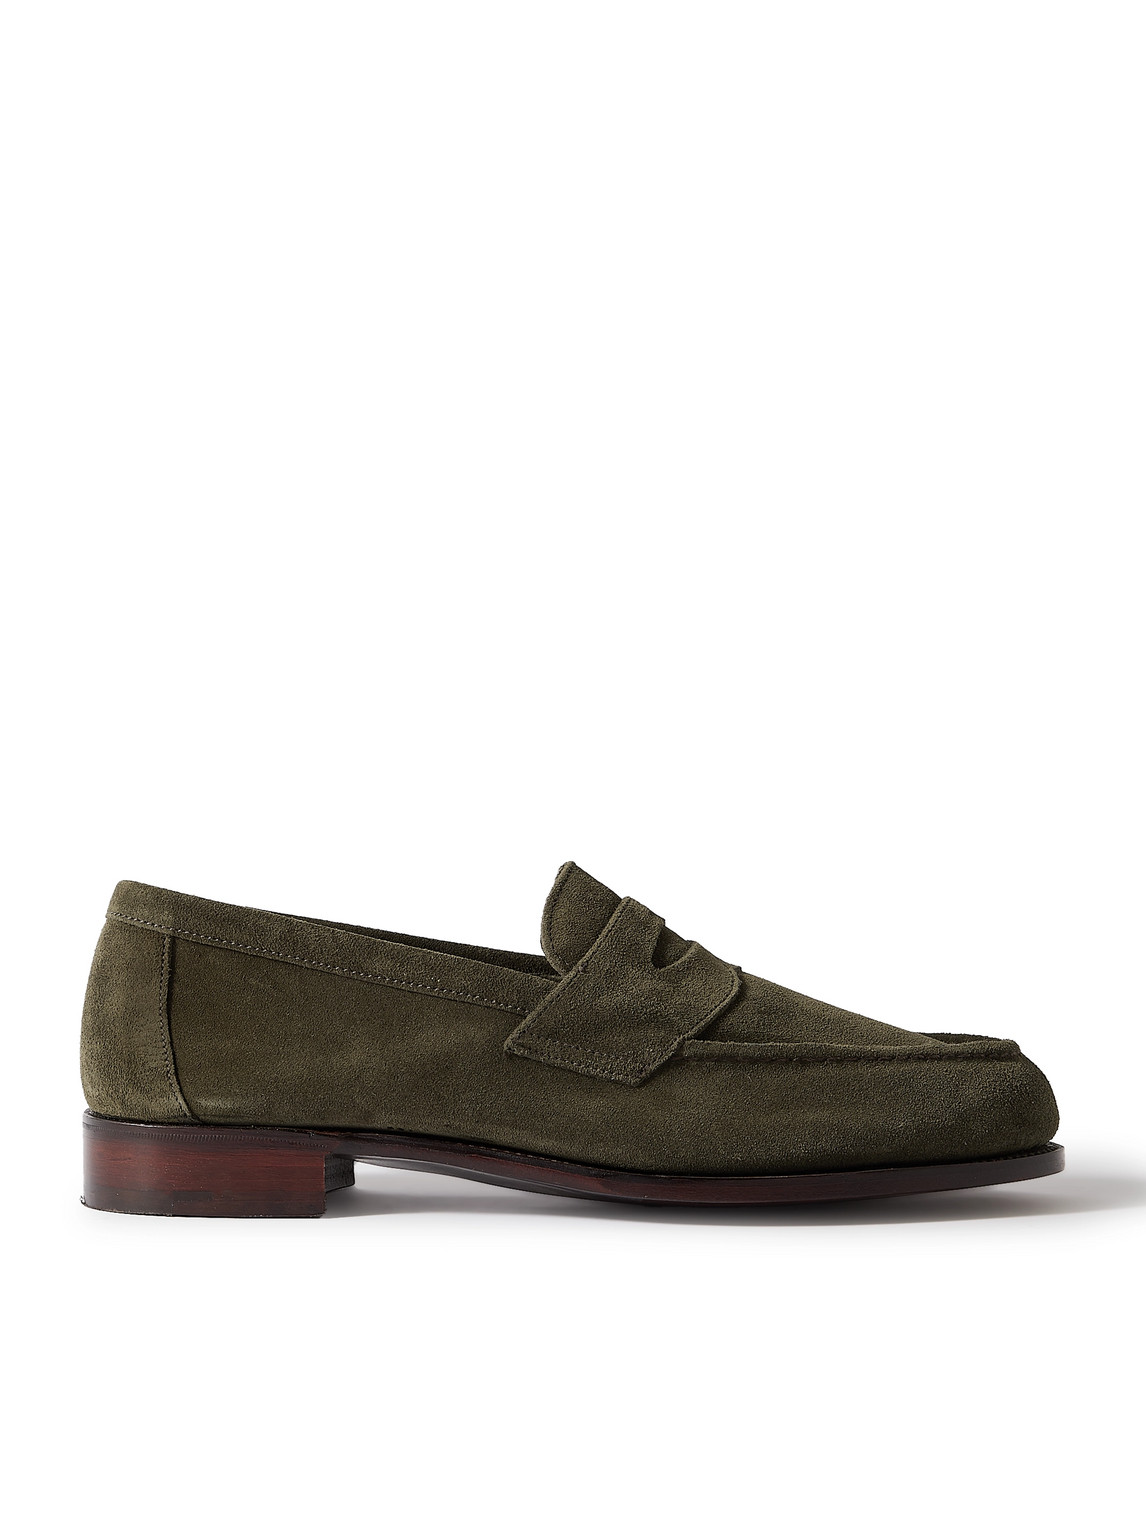 Cannes Suede Penny Loafers